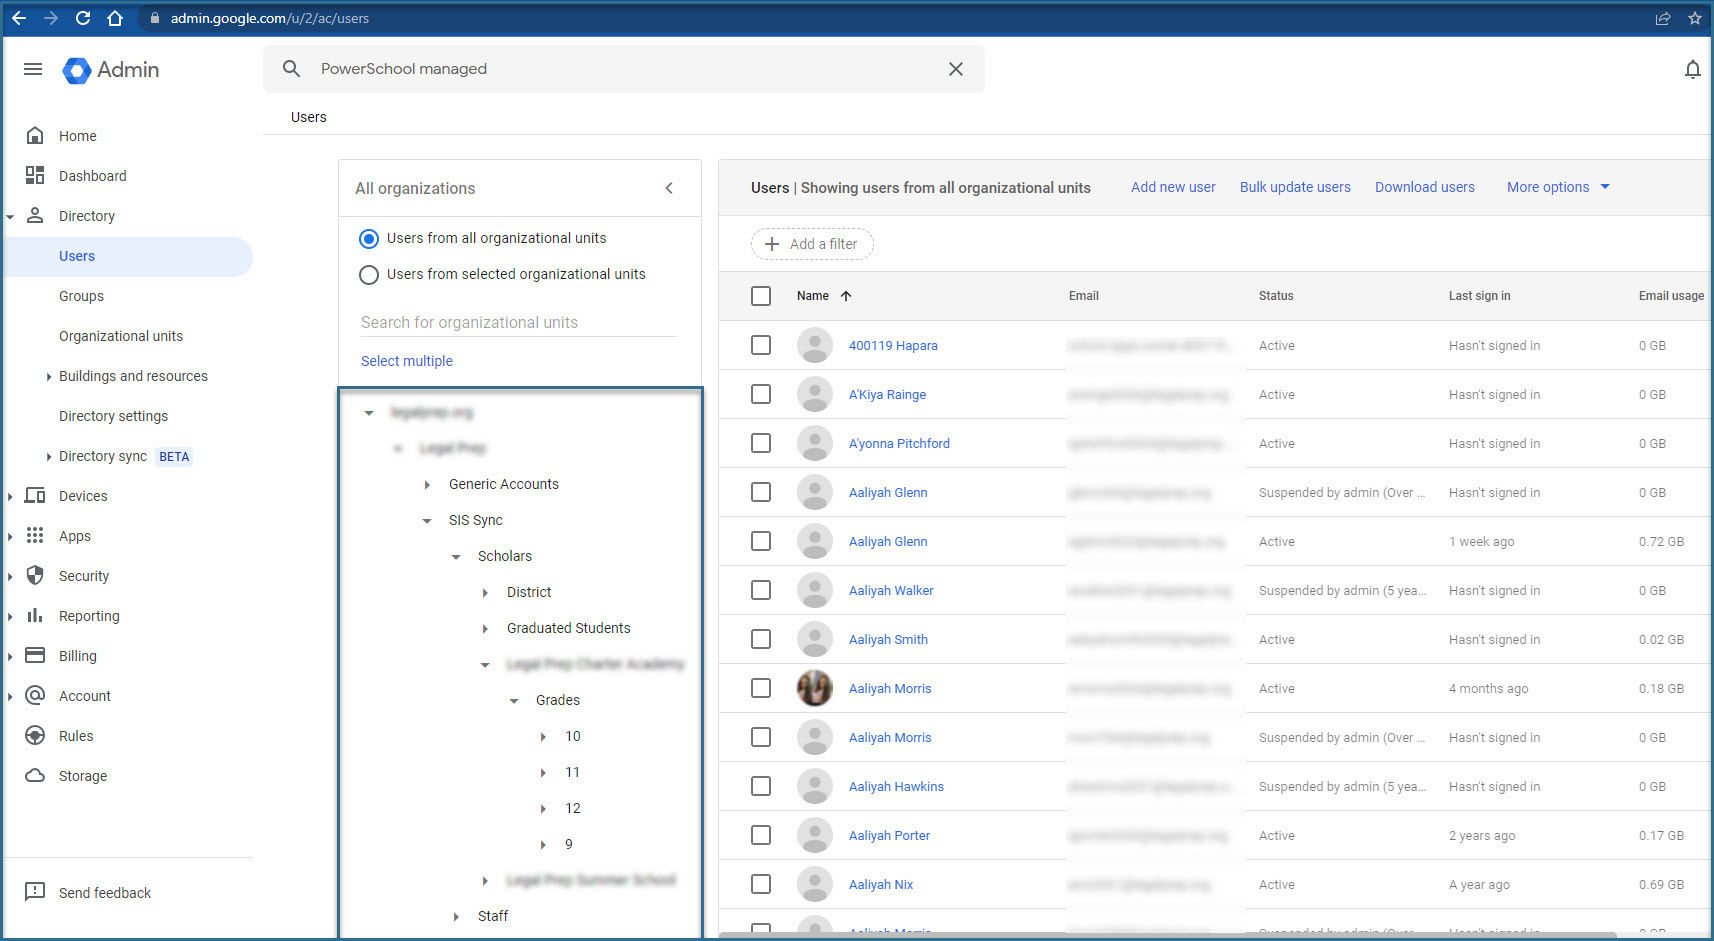 PowerSchool and Google Email Groups and OUs